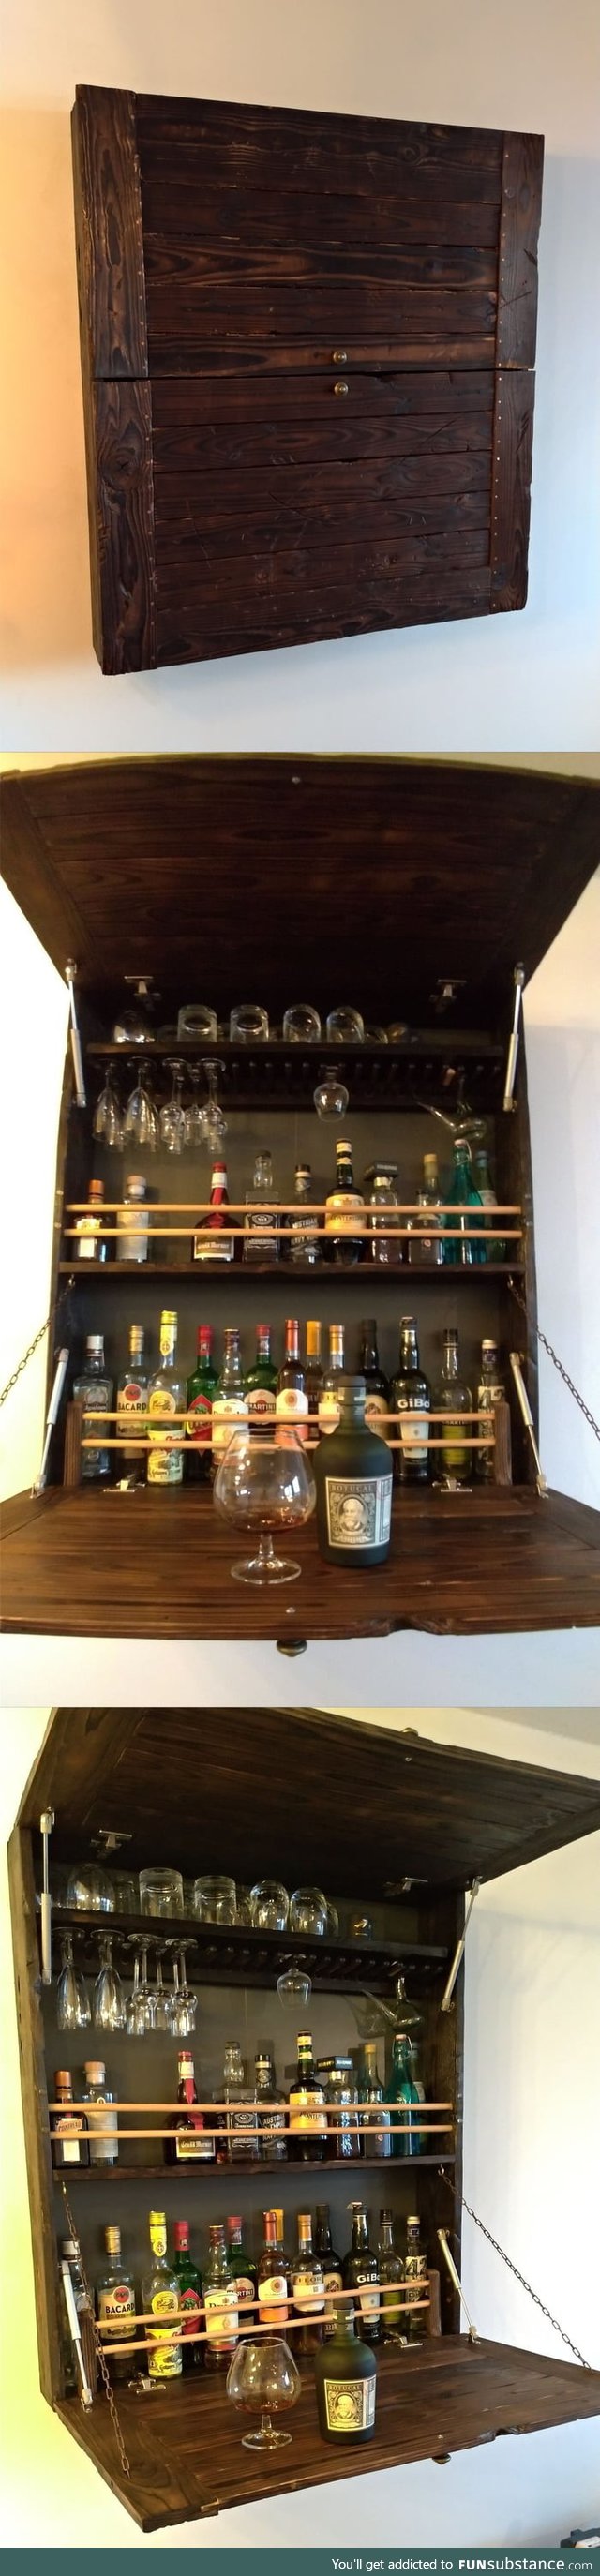 My new spirits rack, entirely designed and made by me. No pallet was harmed during the